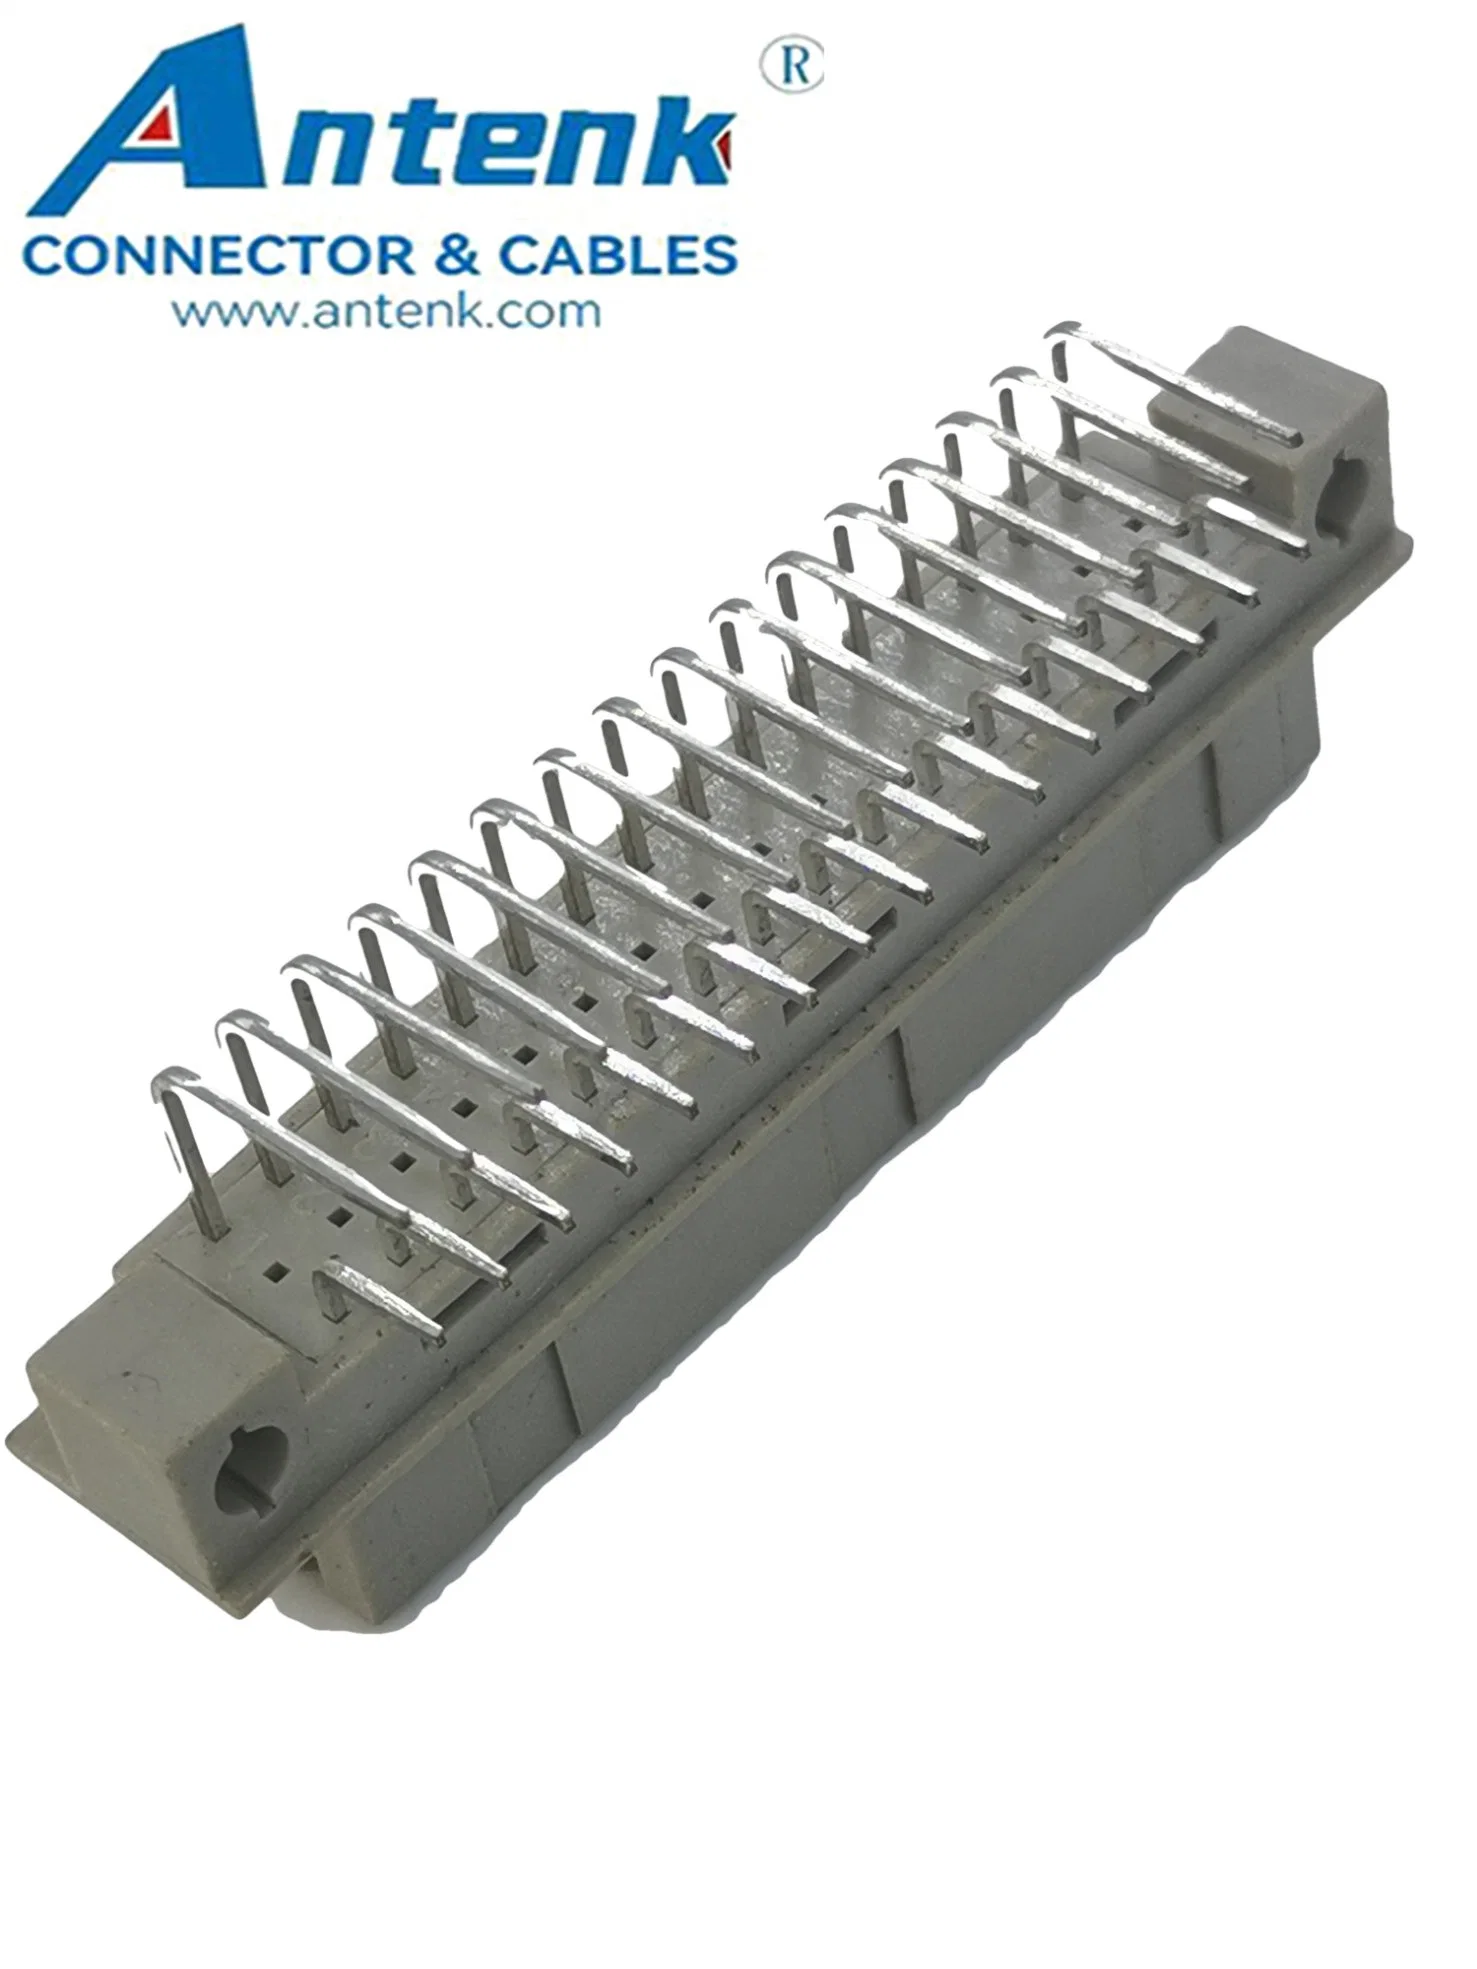 32 Position 2.54mm Pitch, Type R, 3 Row, Right Angle DIN 41612 / IEC 60603-2 Connectors, Receptacle/ Female /Sockets